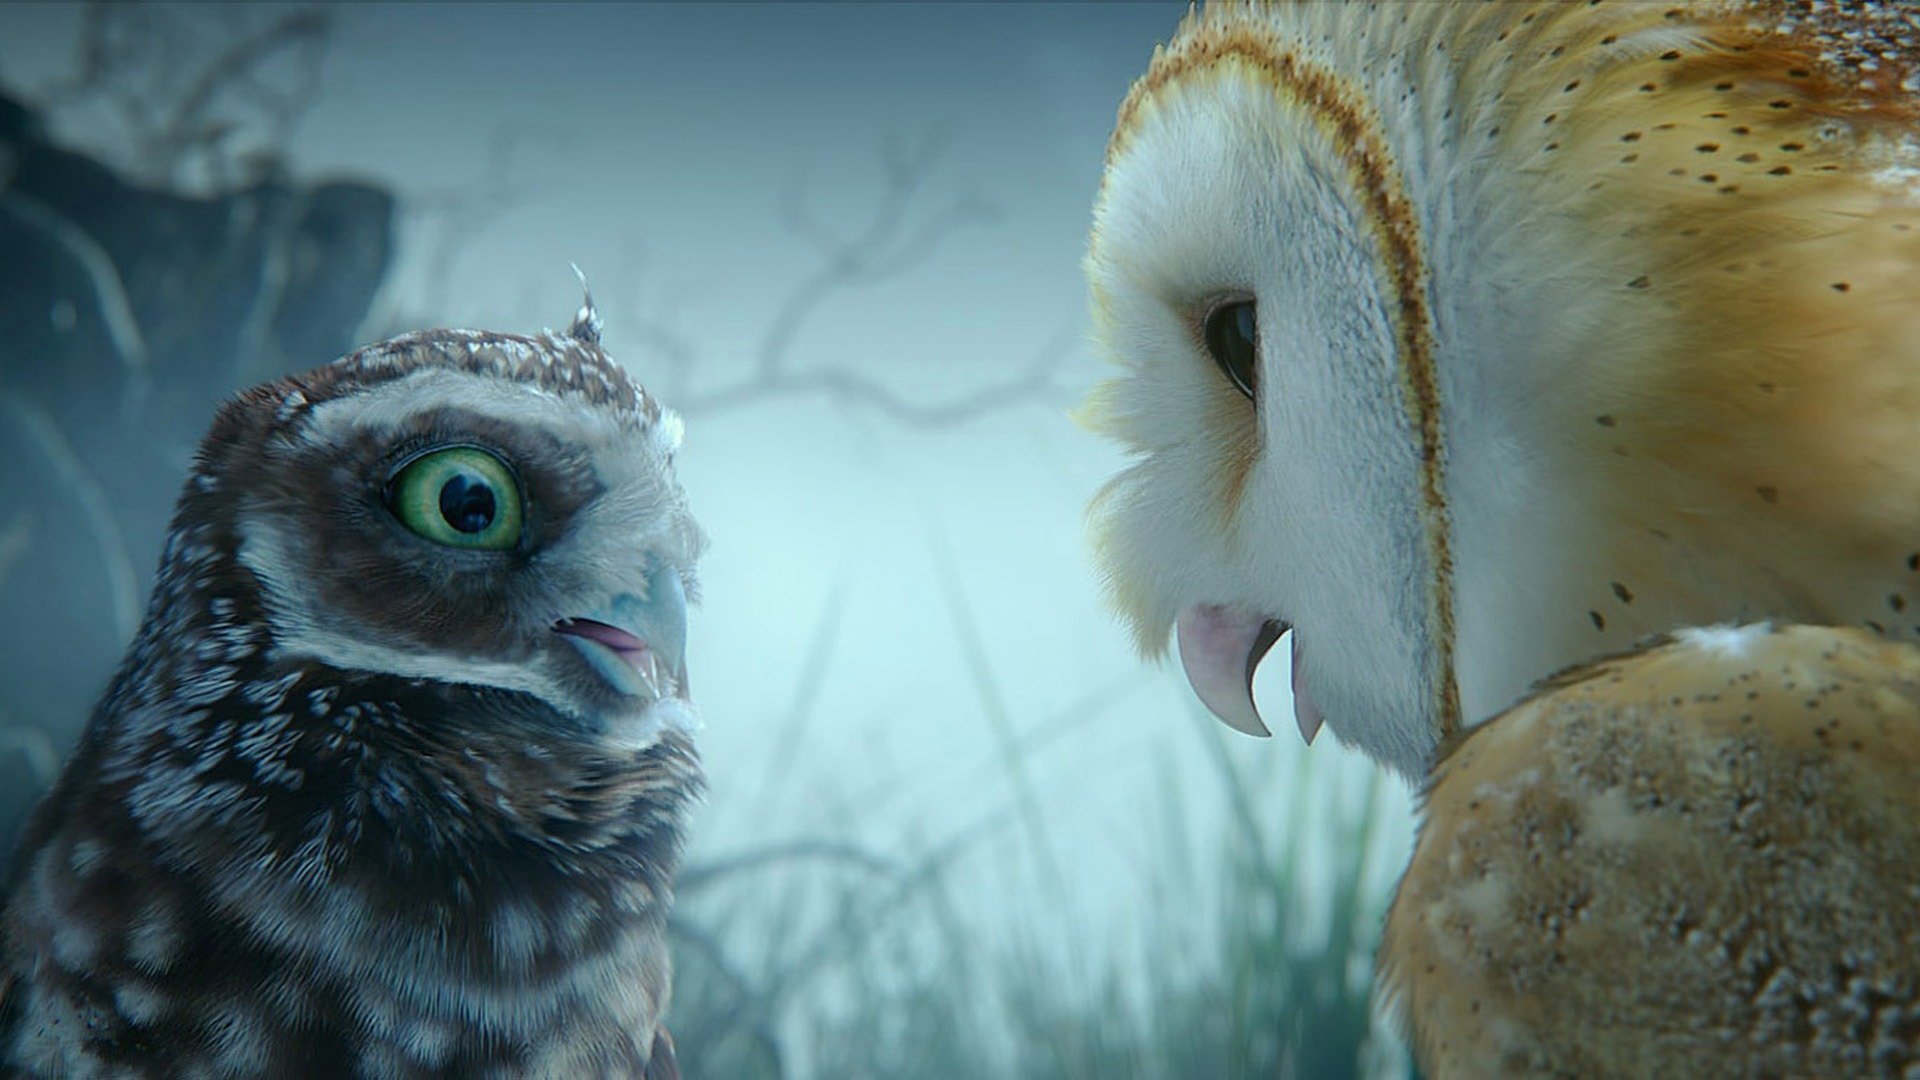 Legend of the Guardians: The Owls of Ga'Hoole, Exciting animation, Captivating adventure, Heroic owls, 1920x1080 Full HD Desktop